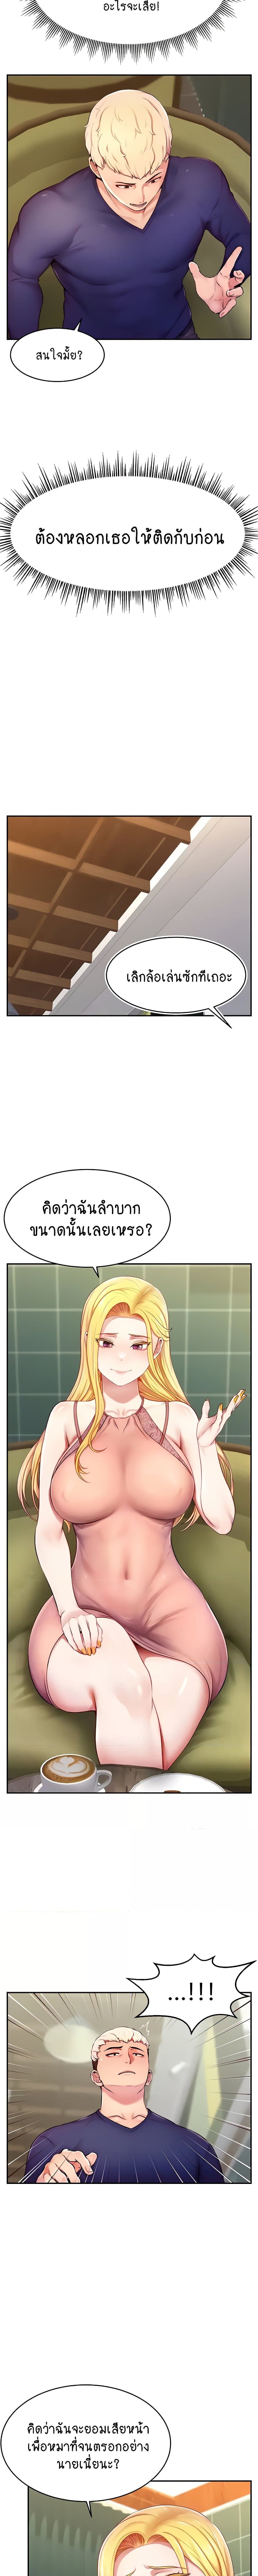 Making Friends With Streamers by Hacking! ตอนที่ 4 ภาพ 6